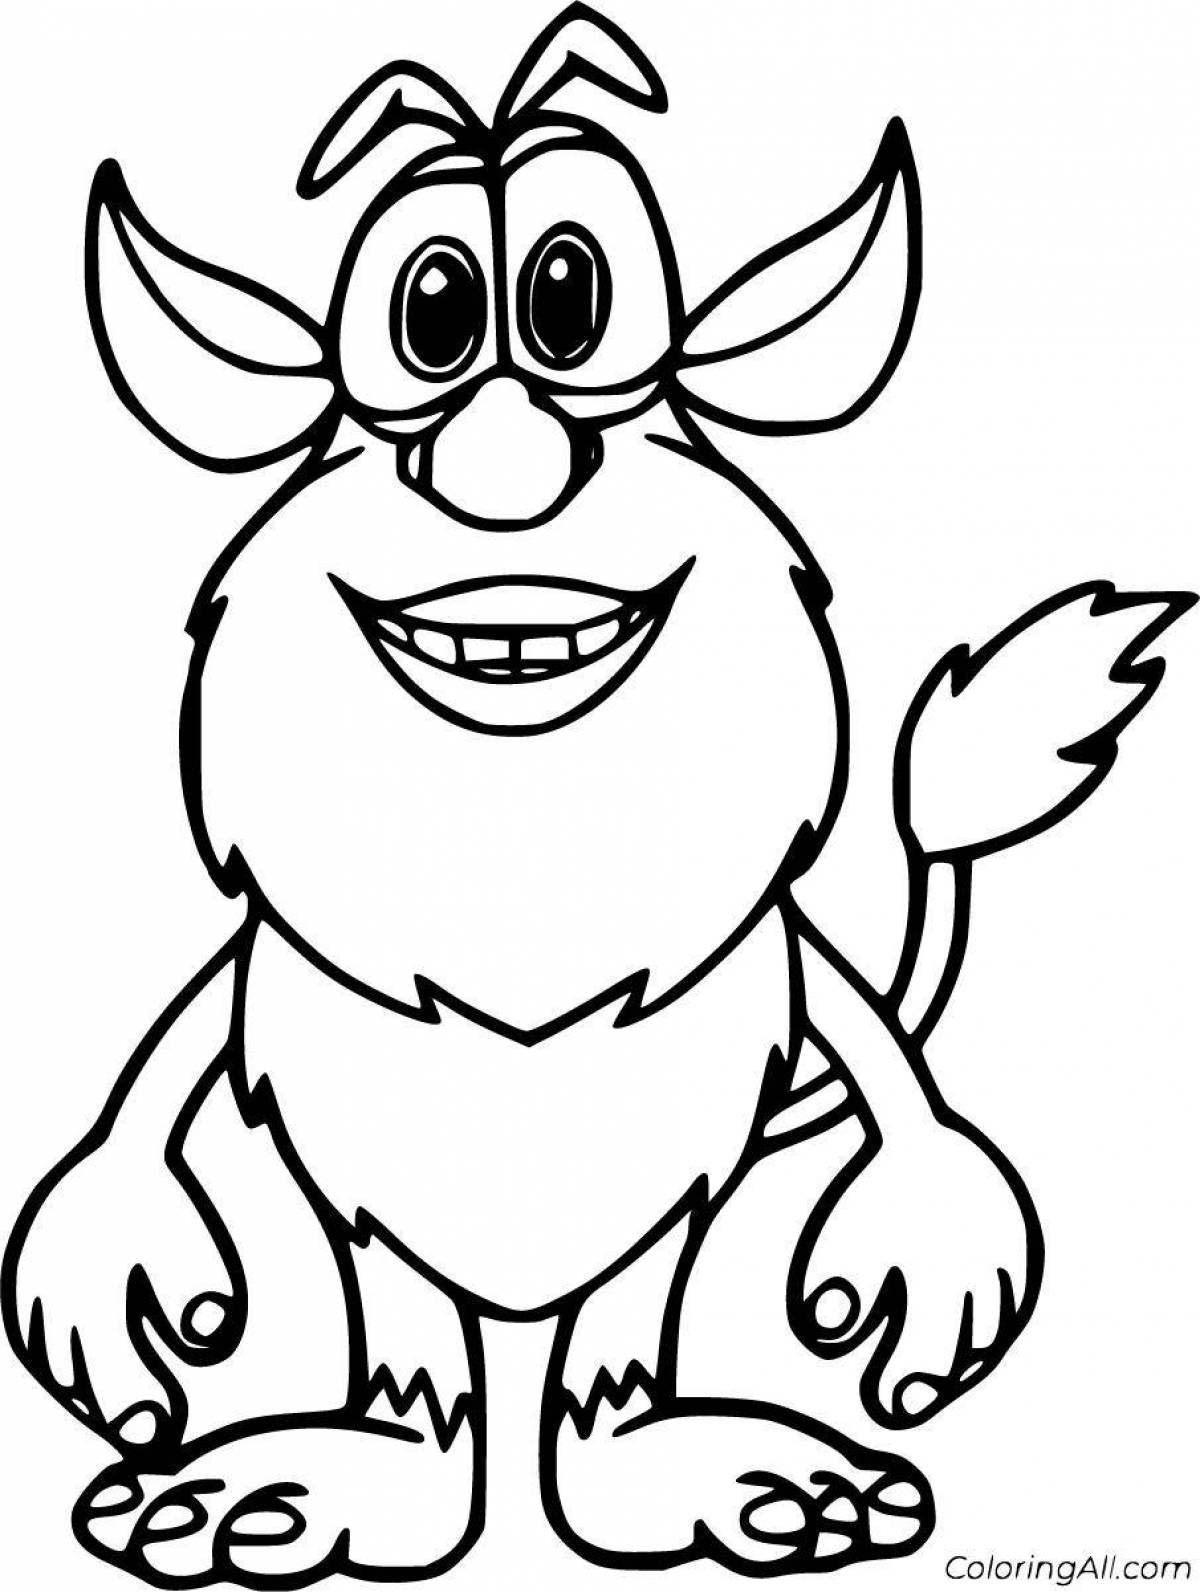 Booba the worm coloring page